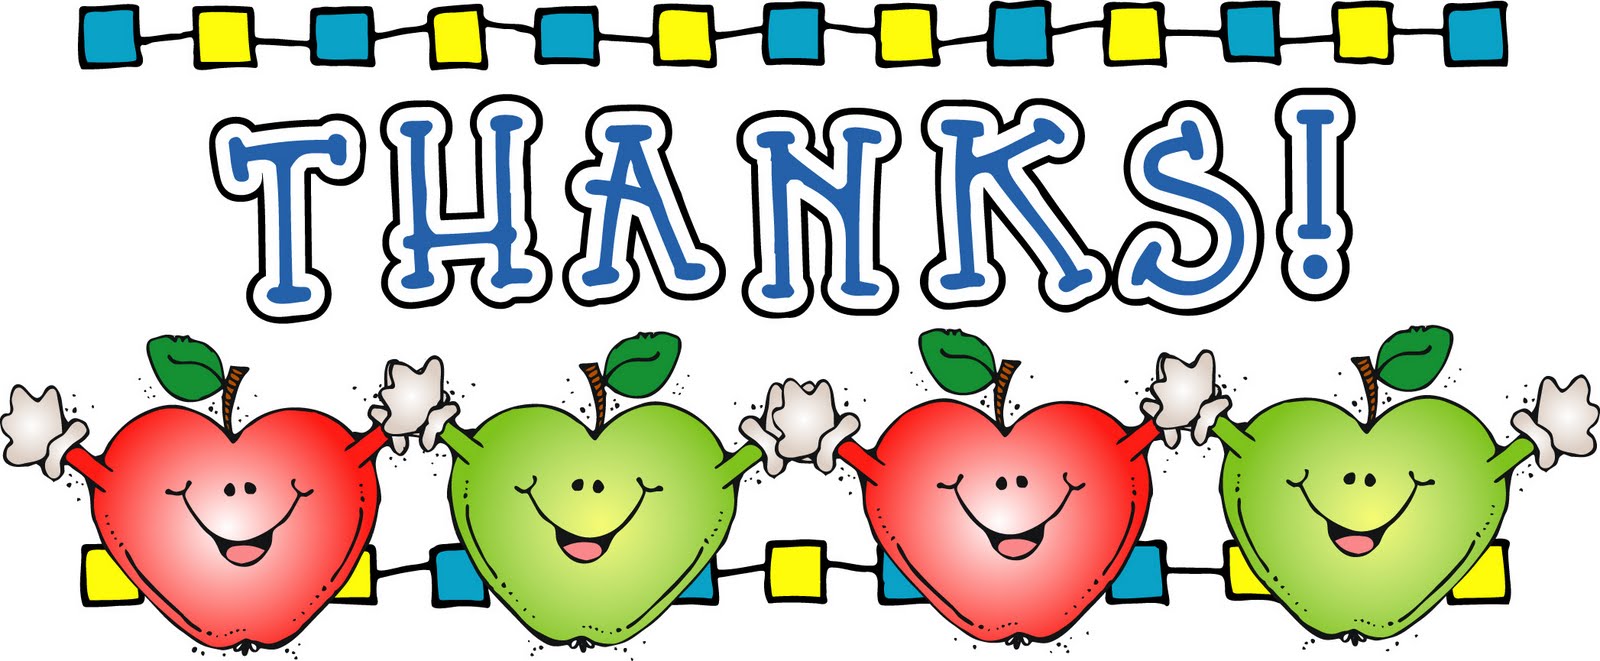 thank you clipart with animals - photo #50